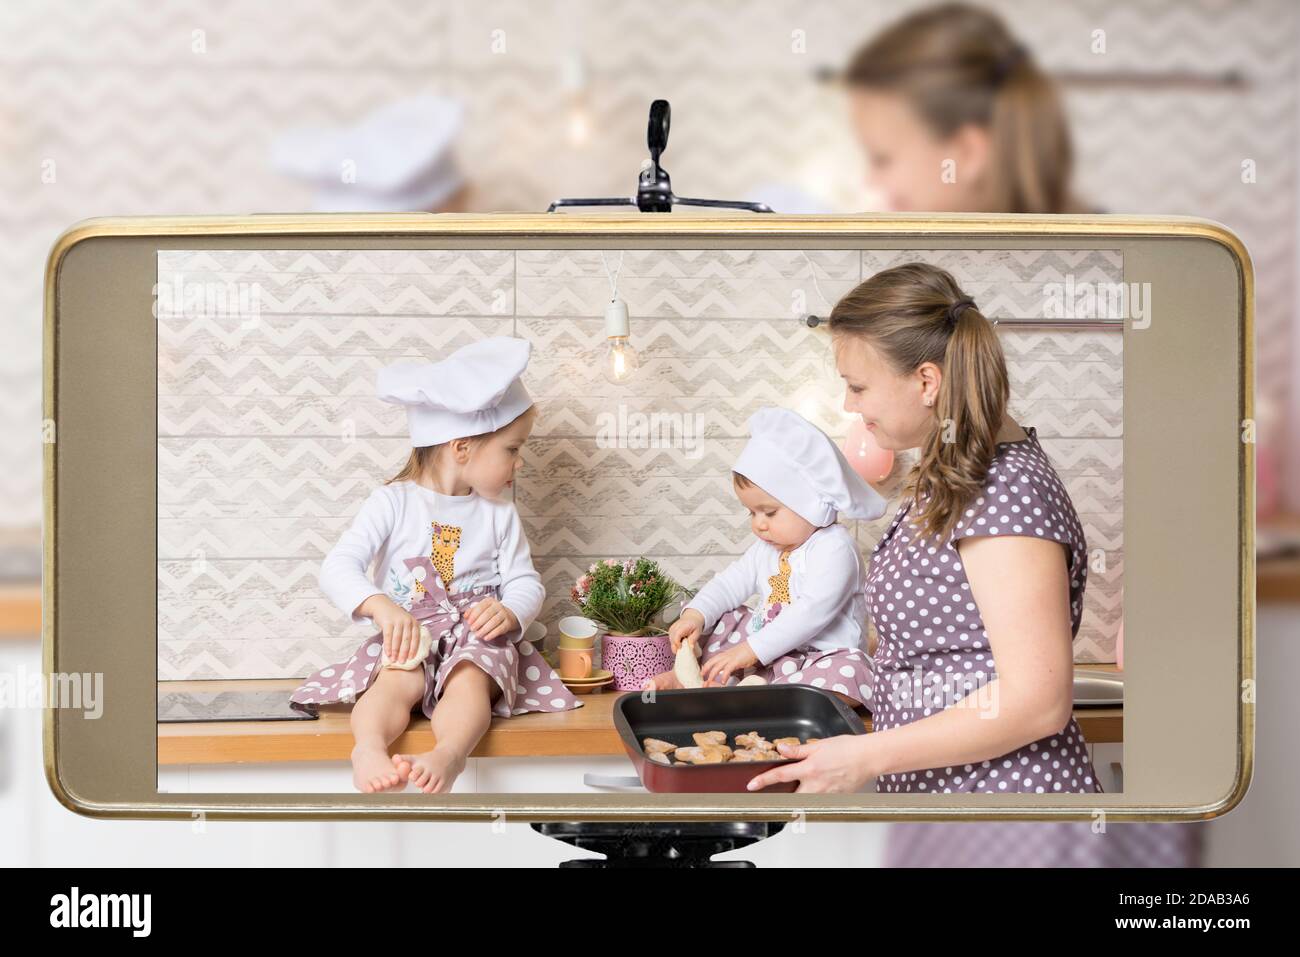 Young female blogger and vlogger online influencer mom with two daughters, live streaming a cooking, baking cookies with children show on social media Stock Photo